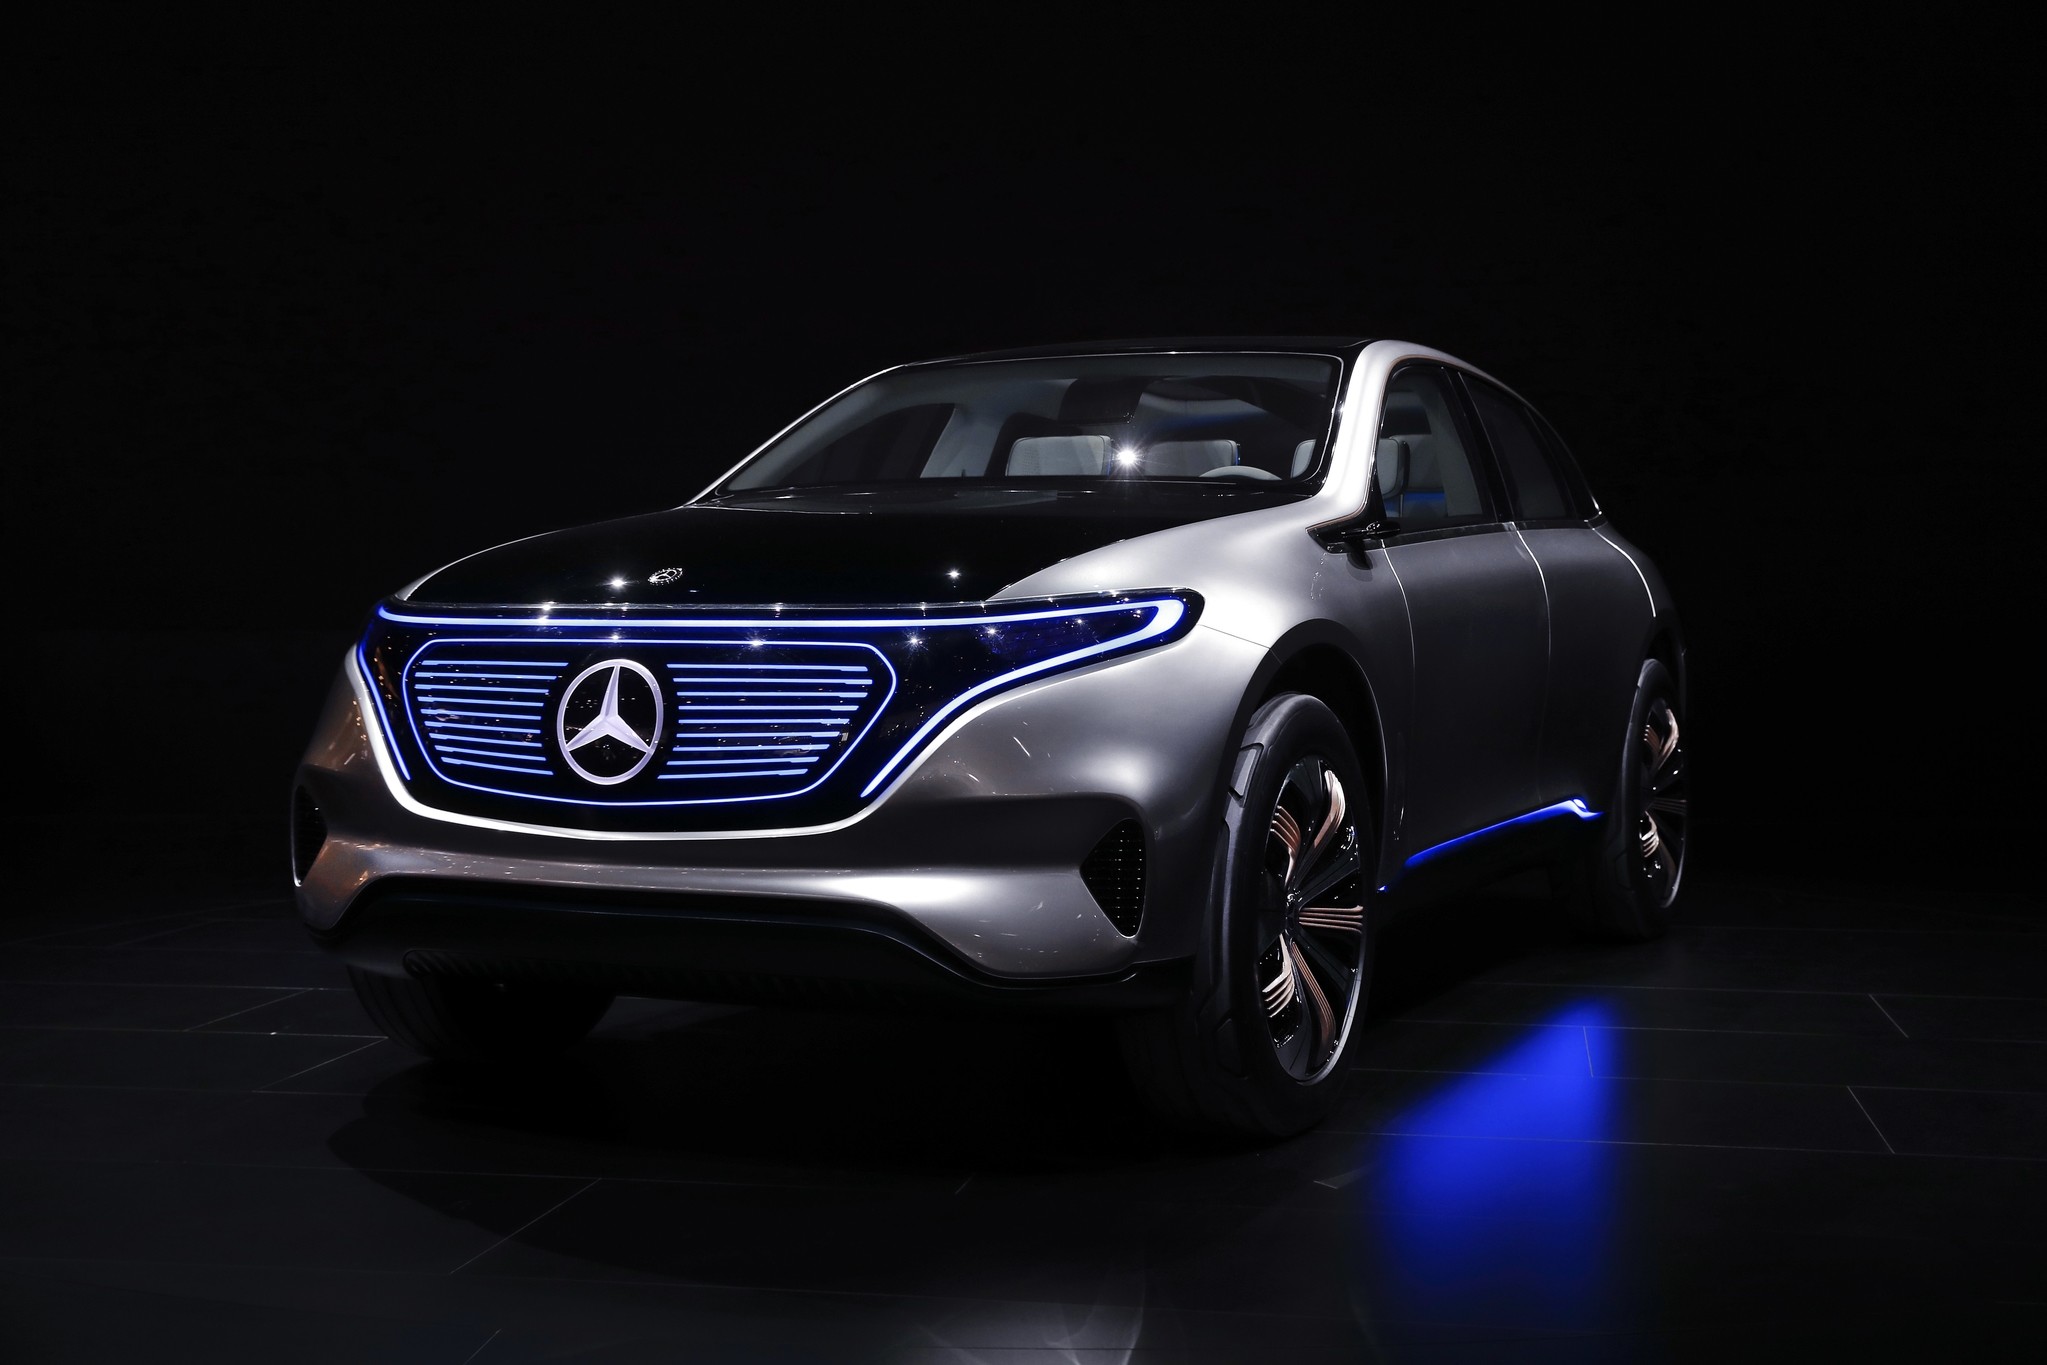 The Mercedes-Benz Concept EQ is on display at the North American International Auto Show in Detroit, Monday, Jan. 9, 2017. (AP Photo)